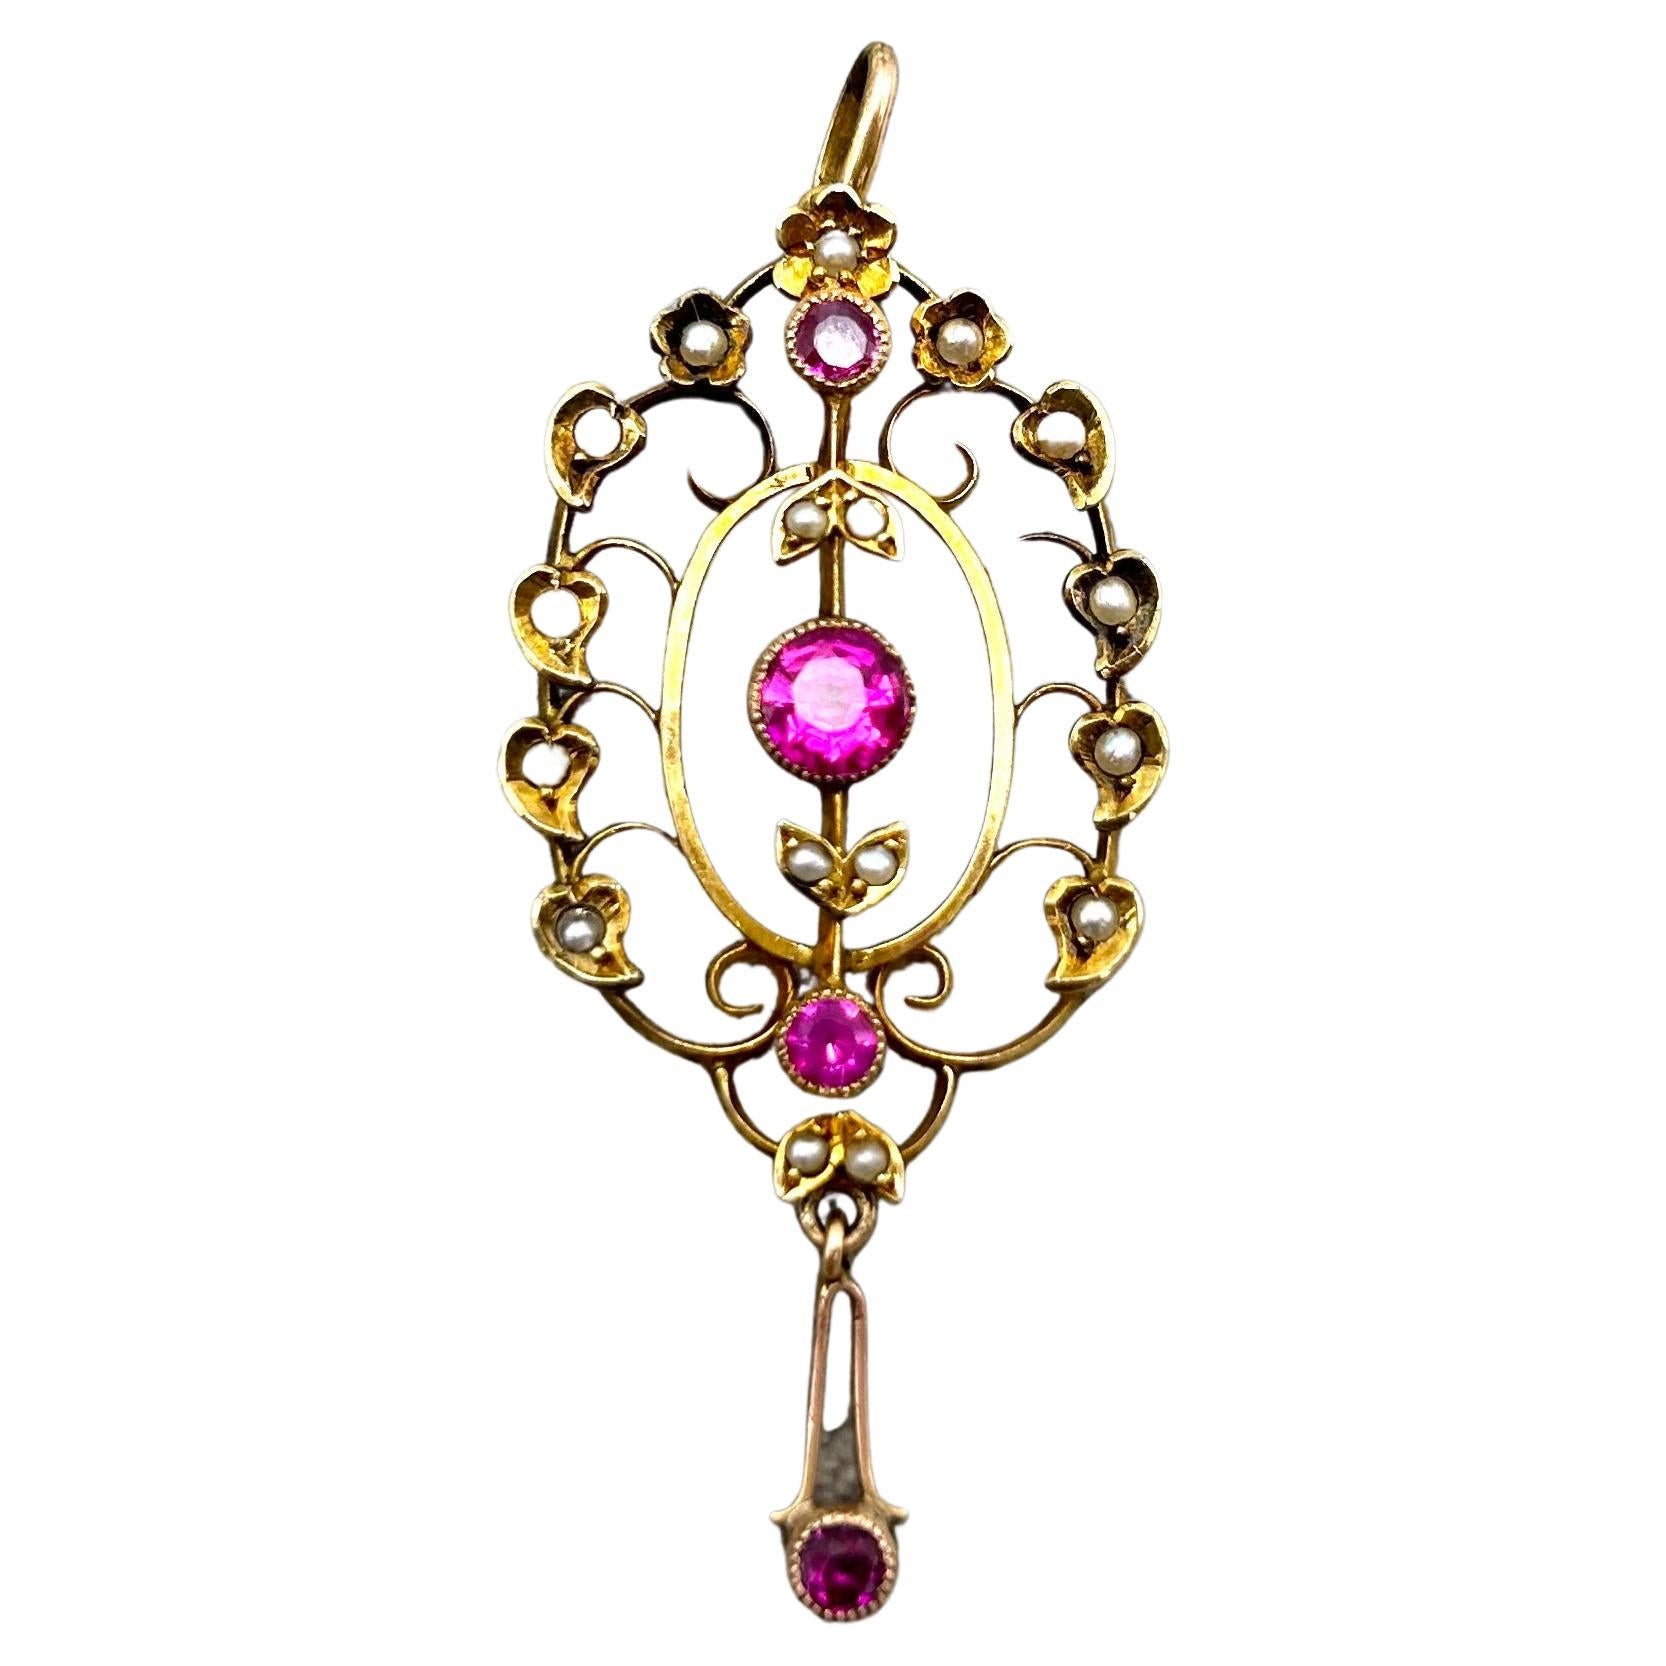 Old gold pendant made of 0.585 yellow gold decorated with four synthetic rubies (rubies made with labolatory technics) and 17 cultured pearls
Very good condition, no damage
length 5.5 cm width 2.5 cm
weight 3.7g